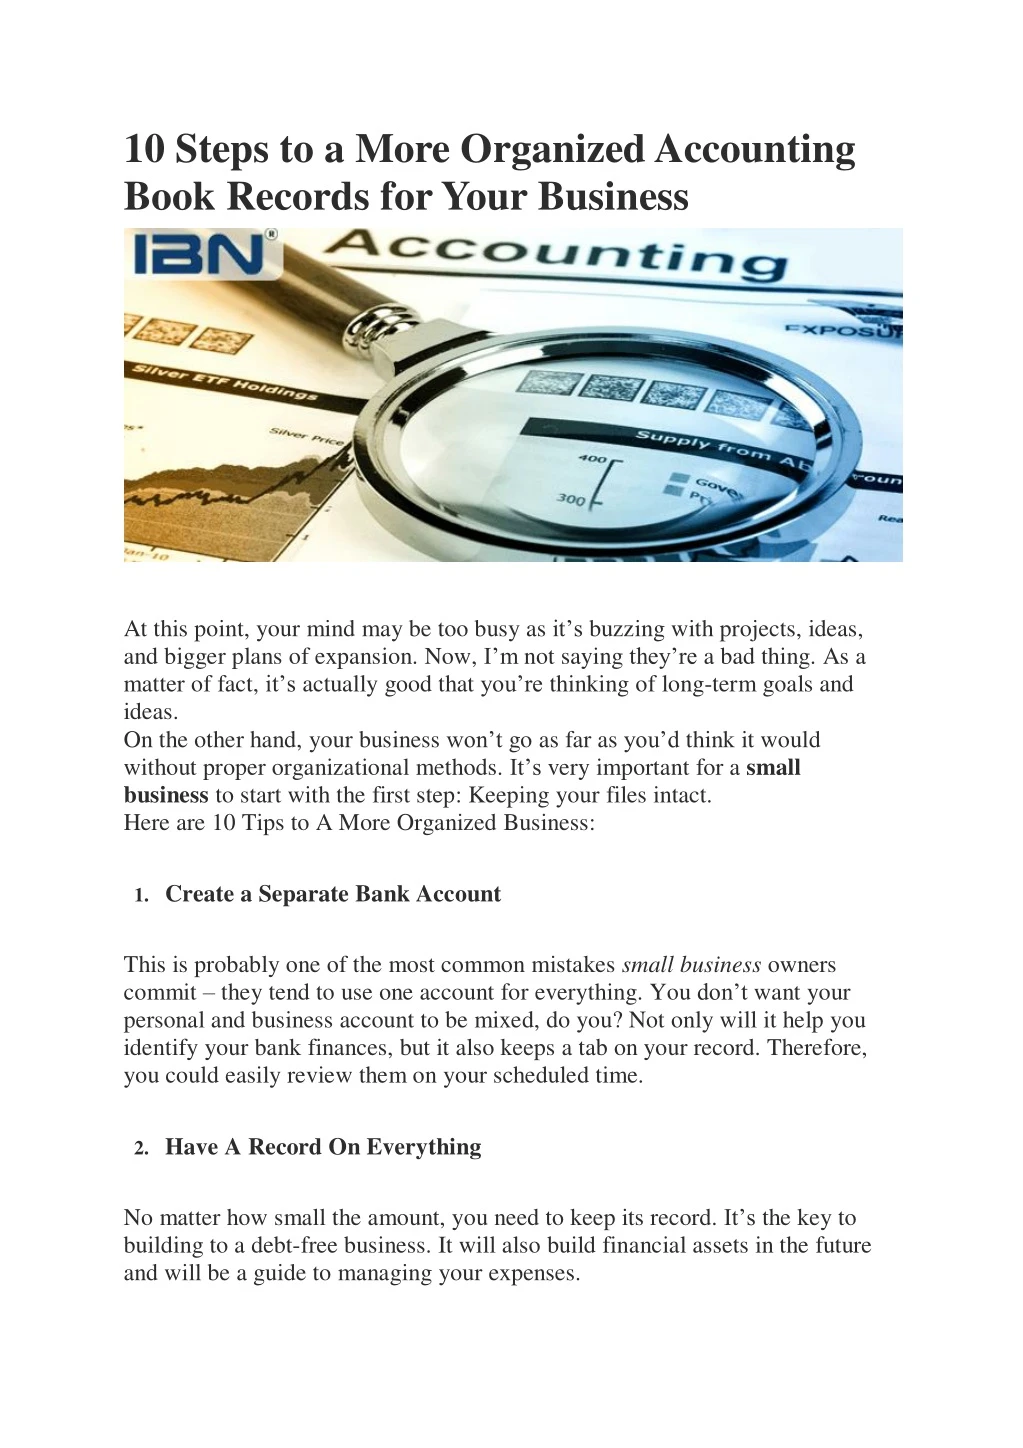 10 steps to a more organized accounting book